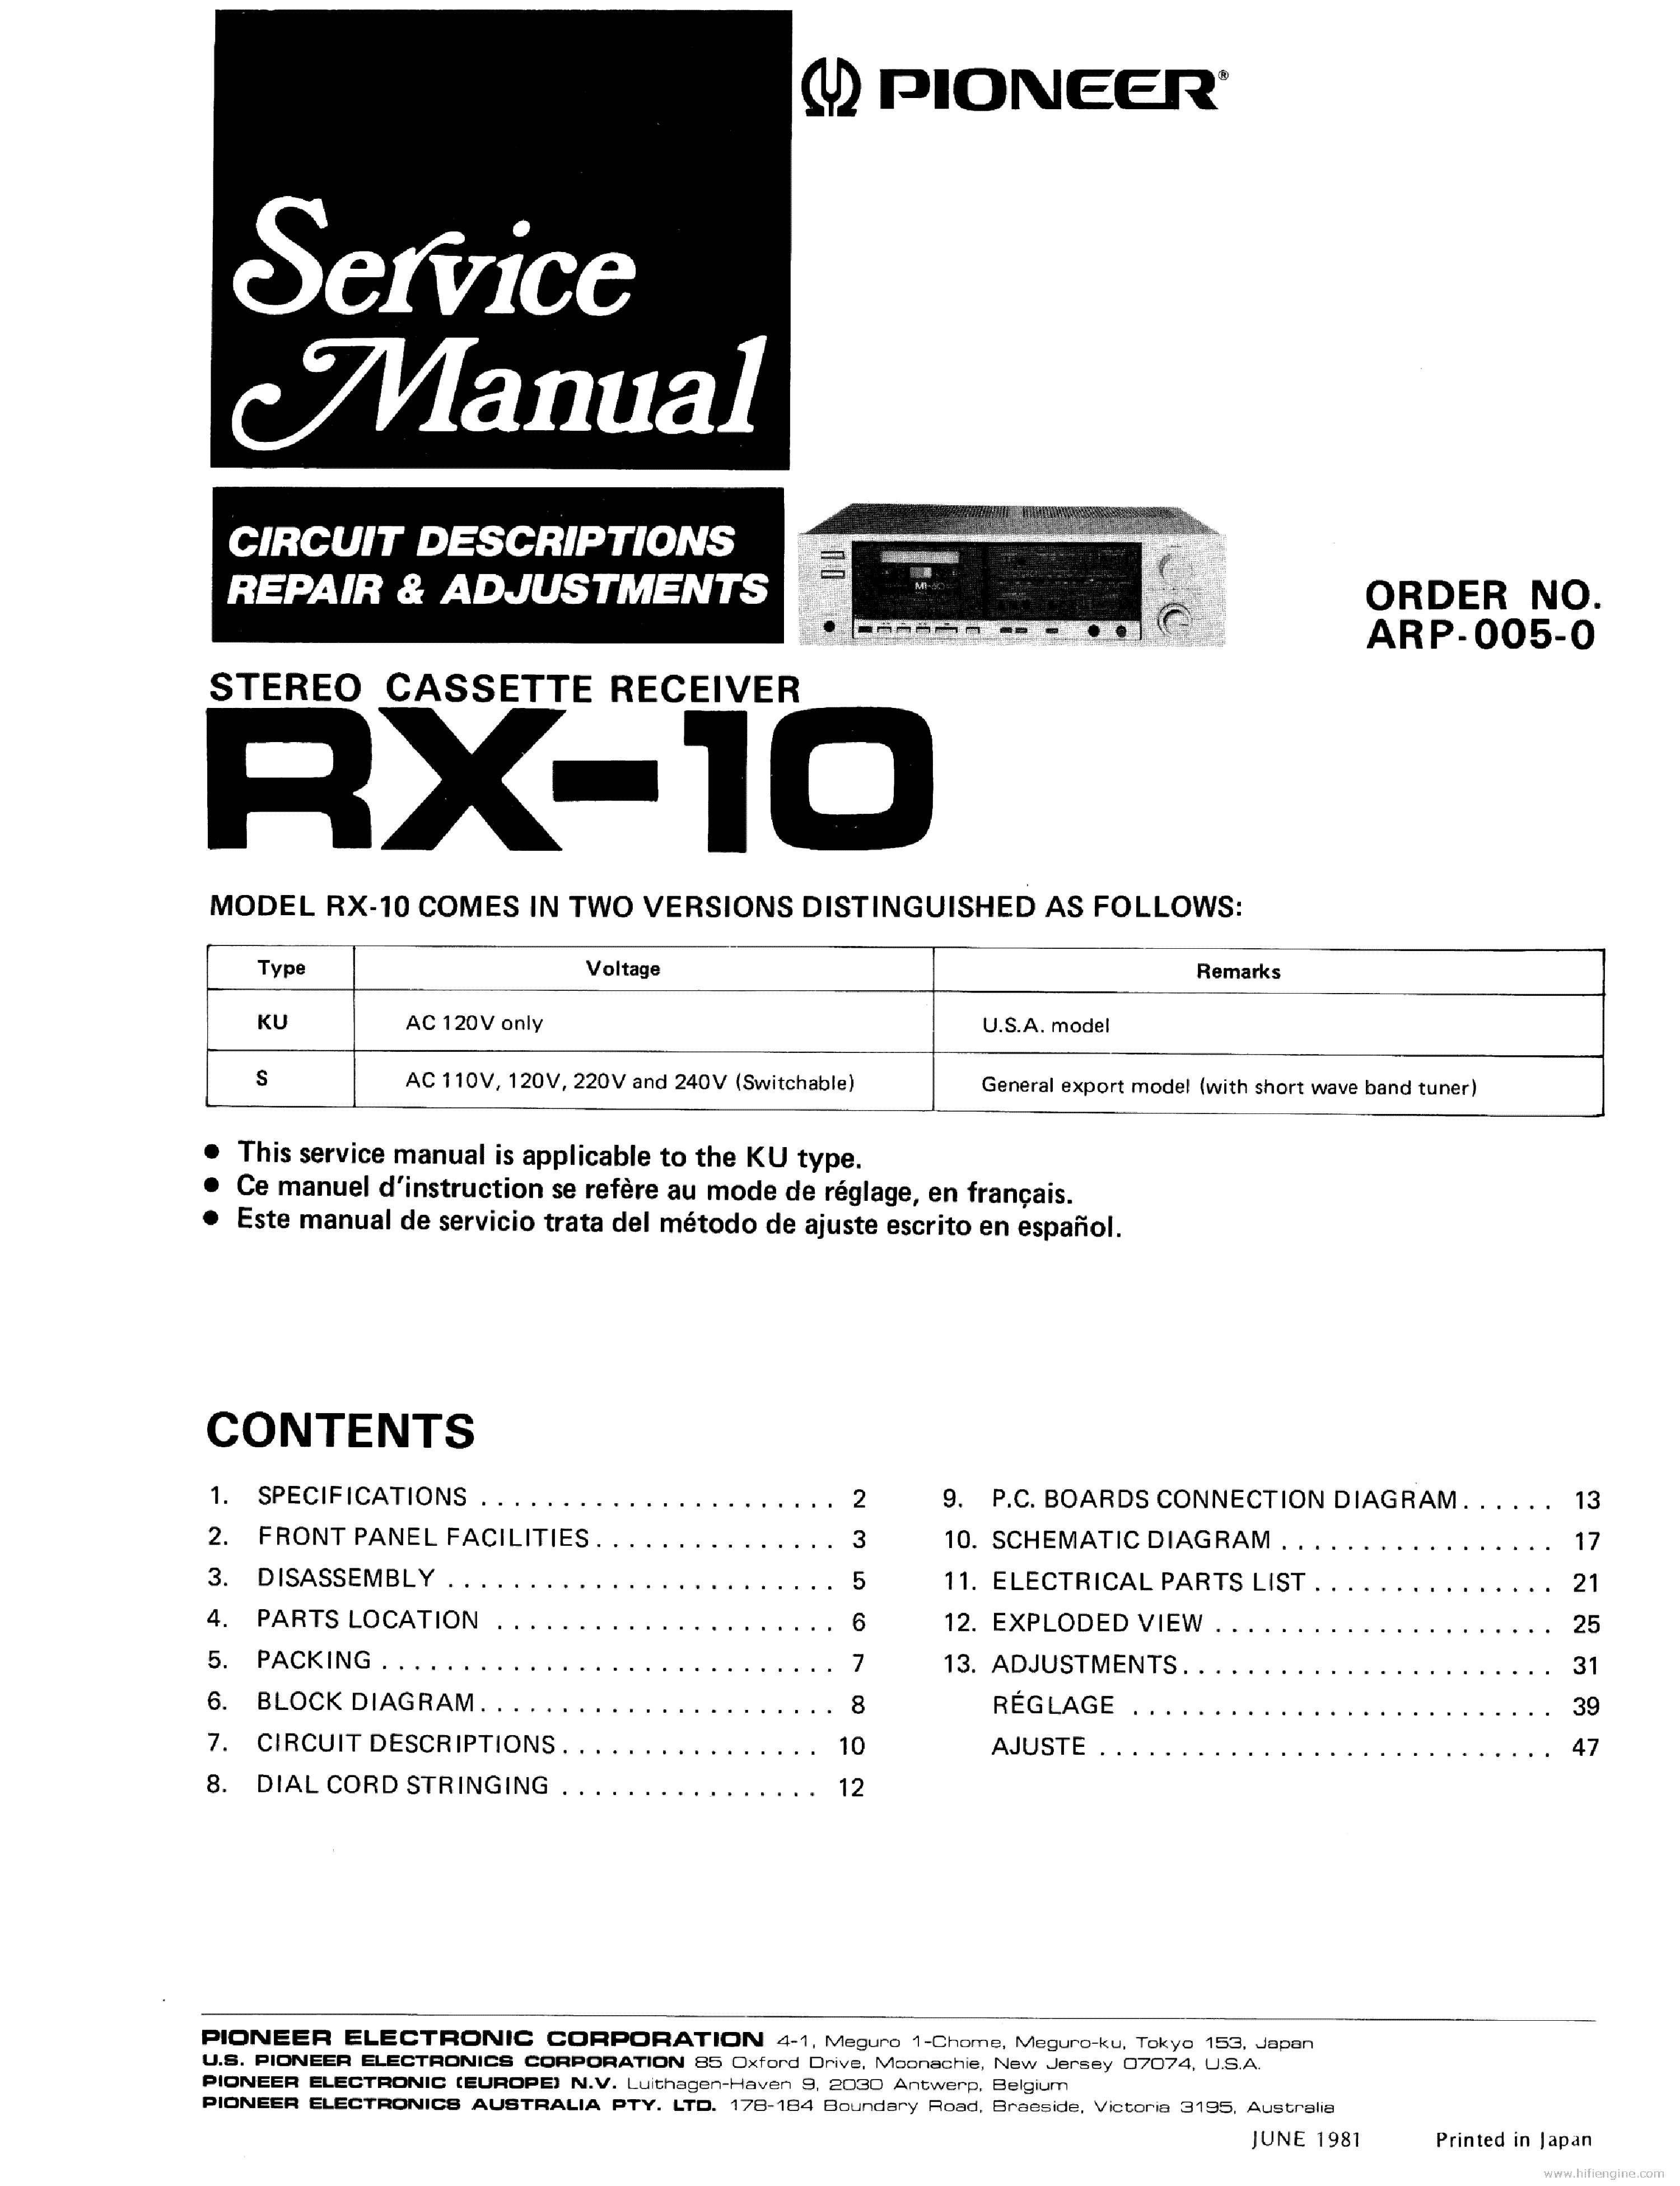 PIONEER RX-10 ARP0050 service manual (1st page)